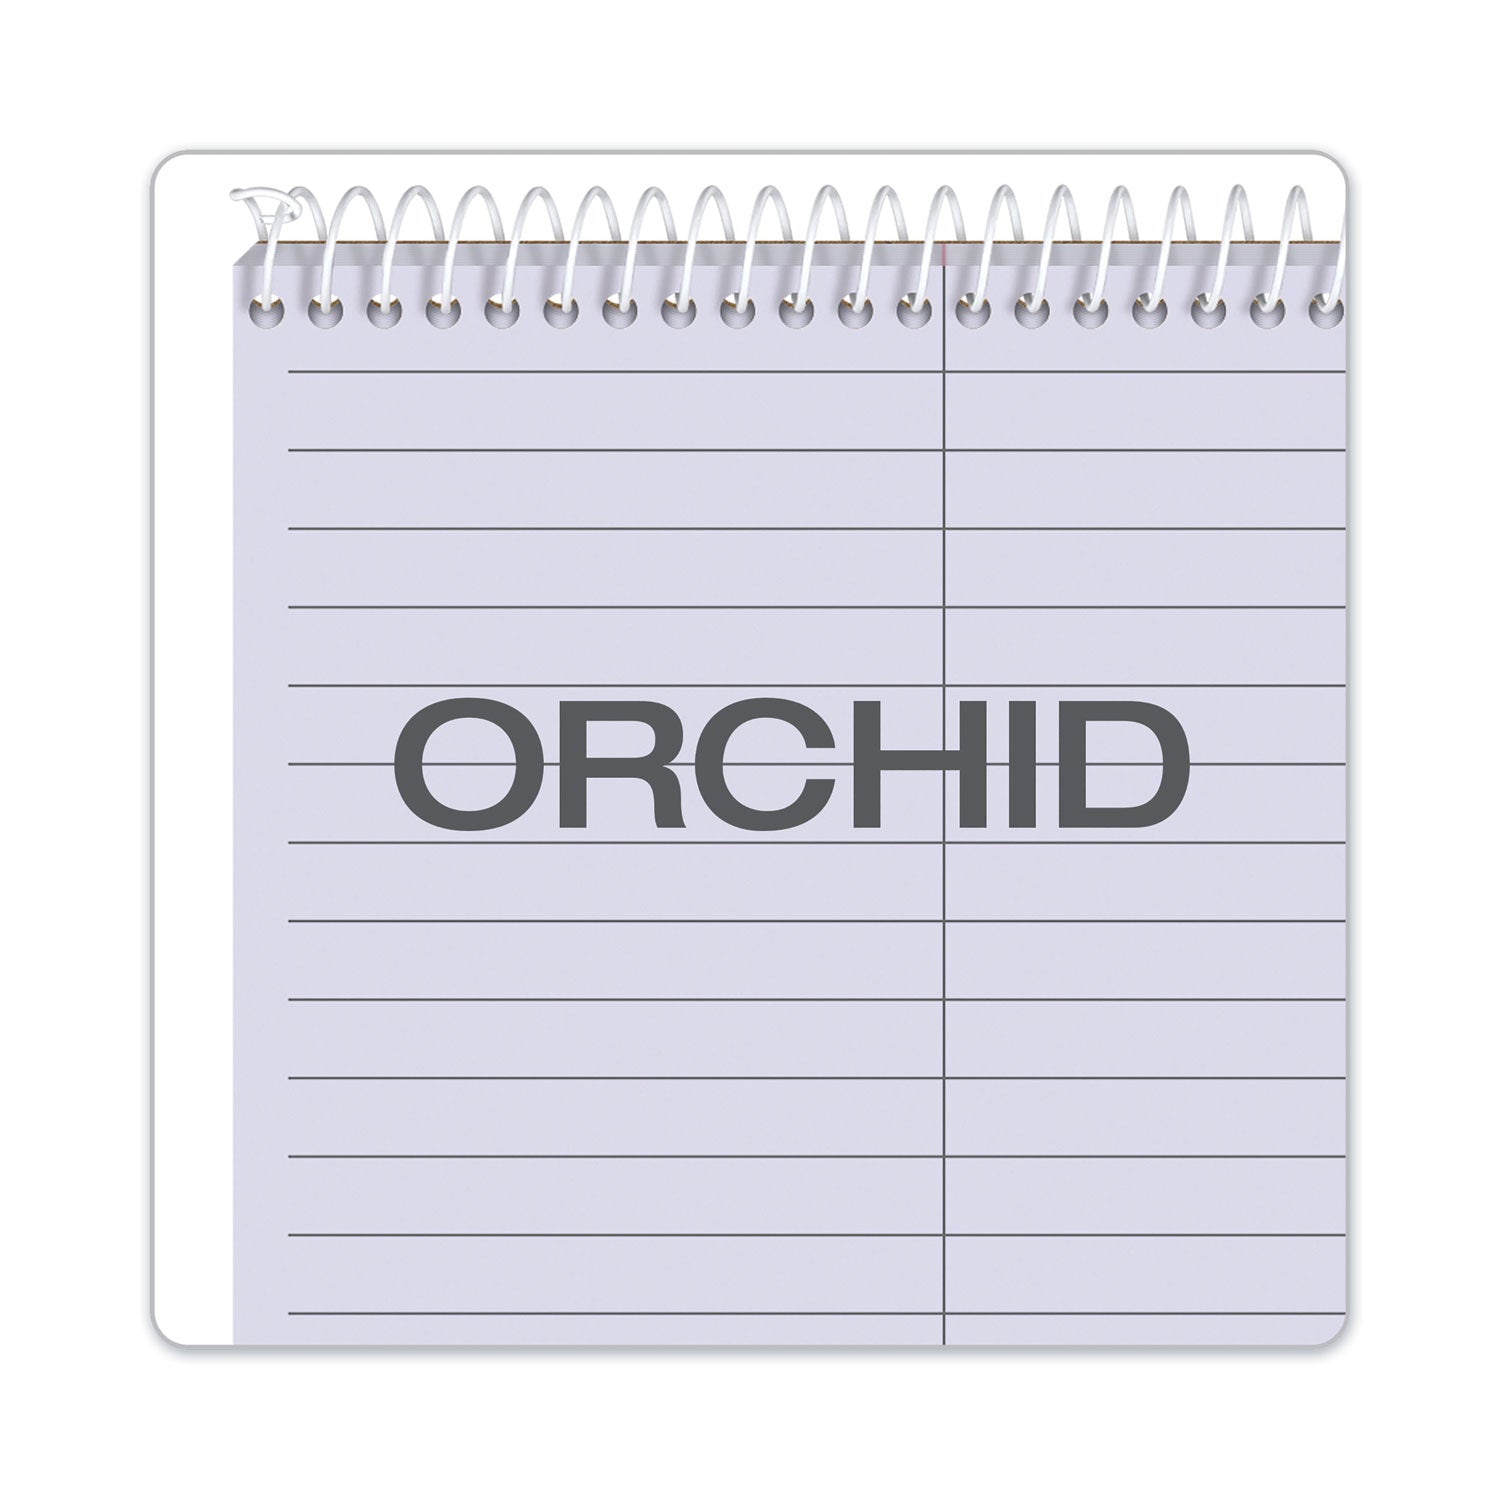 Prism Steno Pads, Gregg Rule, Orchid Cover, 80 Orchid 6 x 9 Sheets, 4/Pack - 